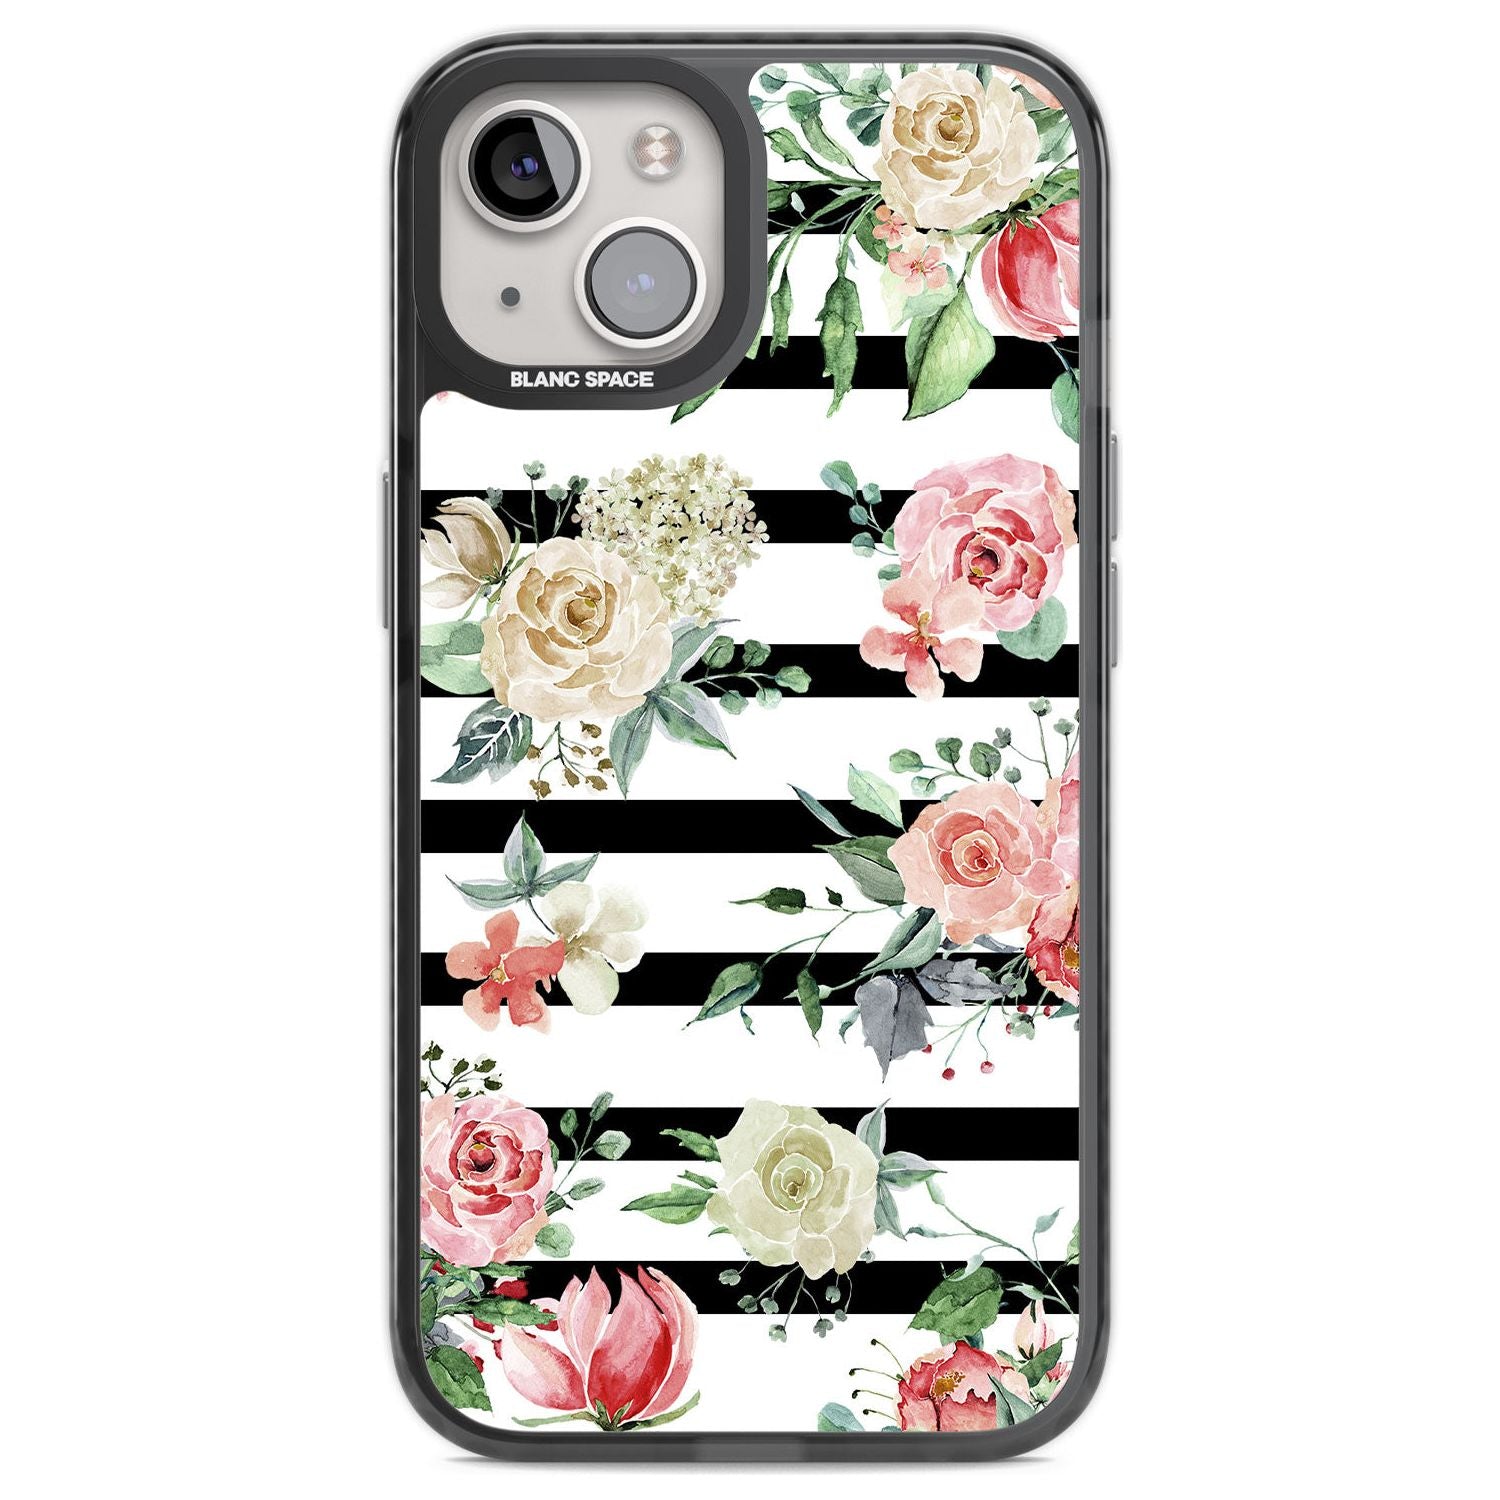 Bold Stripes & Flower Pattern Phone Case iPhone 12 / Black Impact Case,iPhone 13 / Black Impact Case,iPhone 12 Pro / Black Impact Case,iPhone 14 / Black Impact Case,iPhone 15 Plus / Black Impact Case,iPhone 15 / Black Impact Case Blanc Space